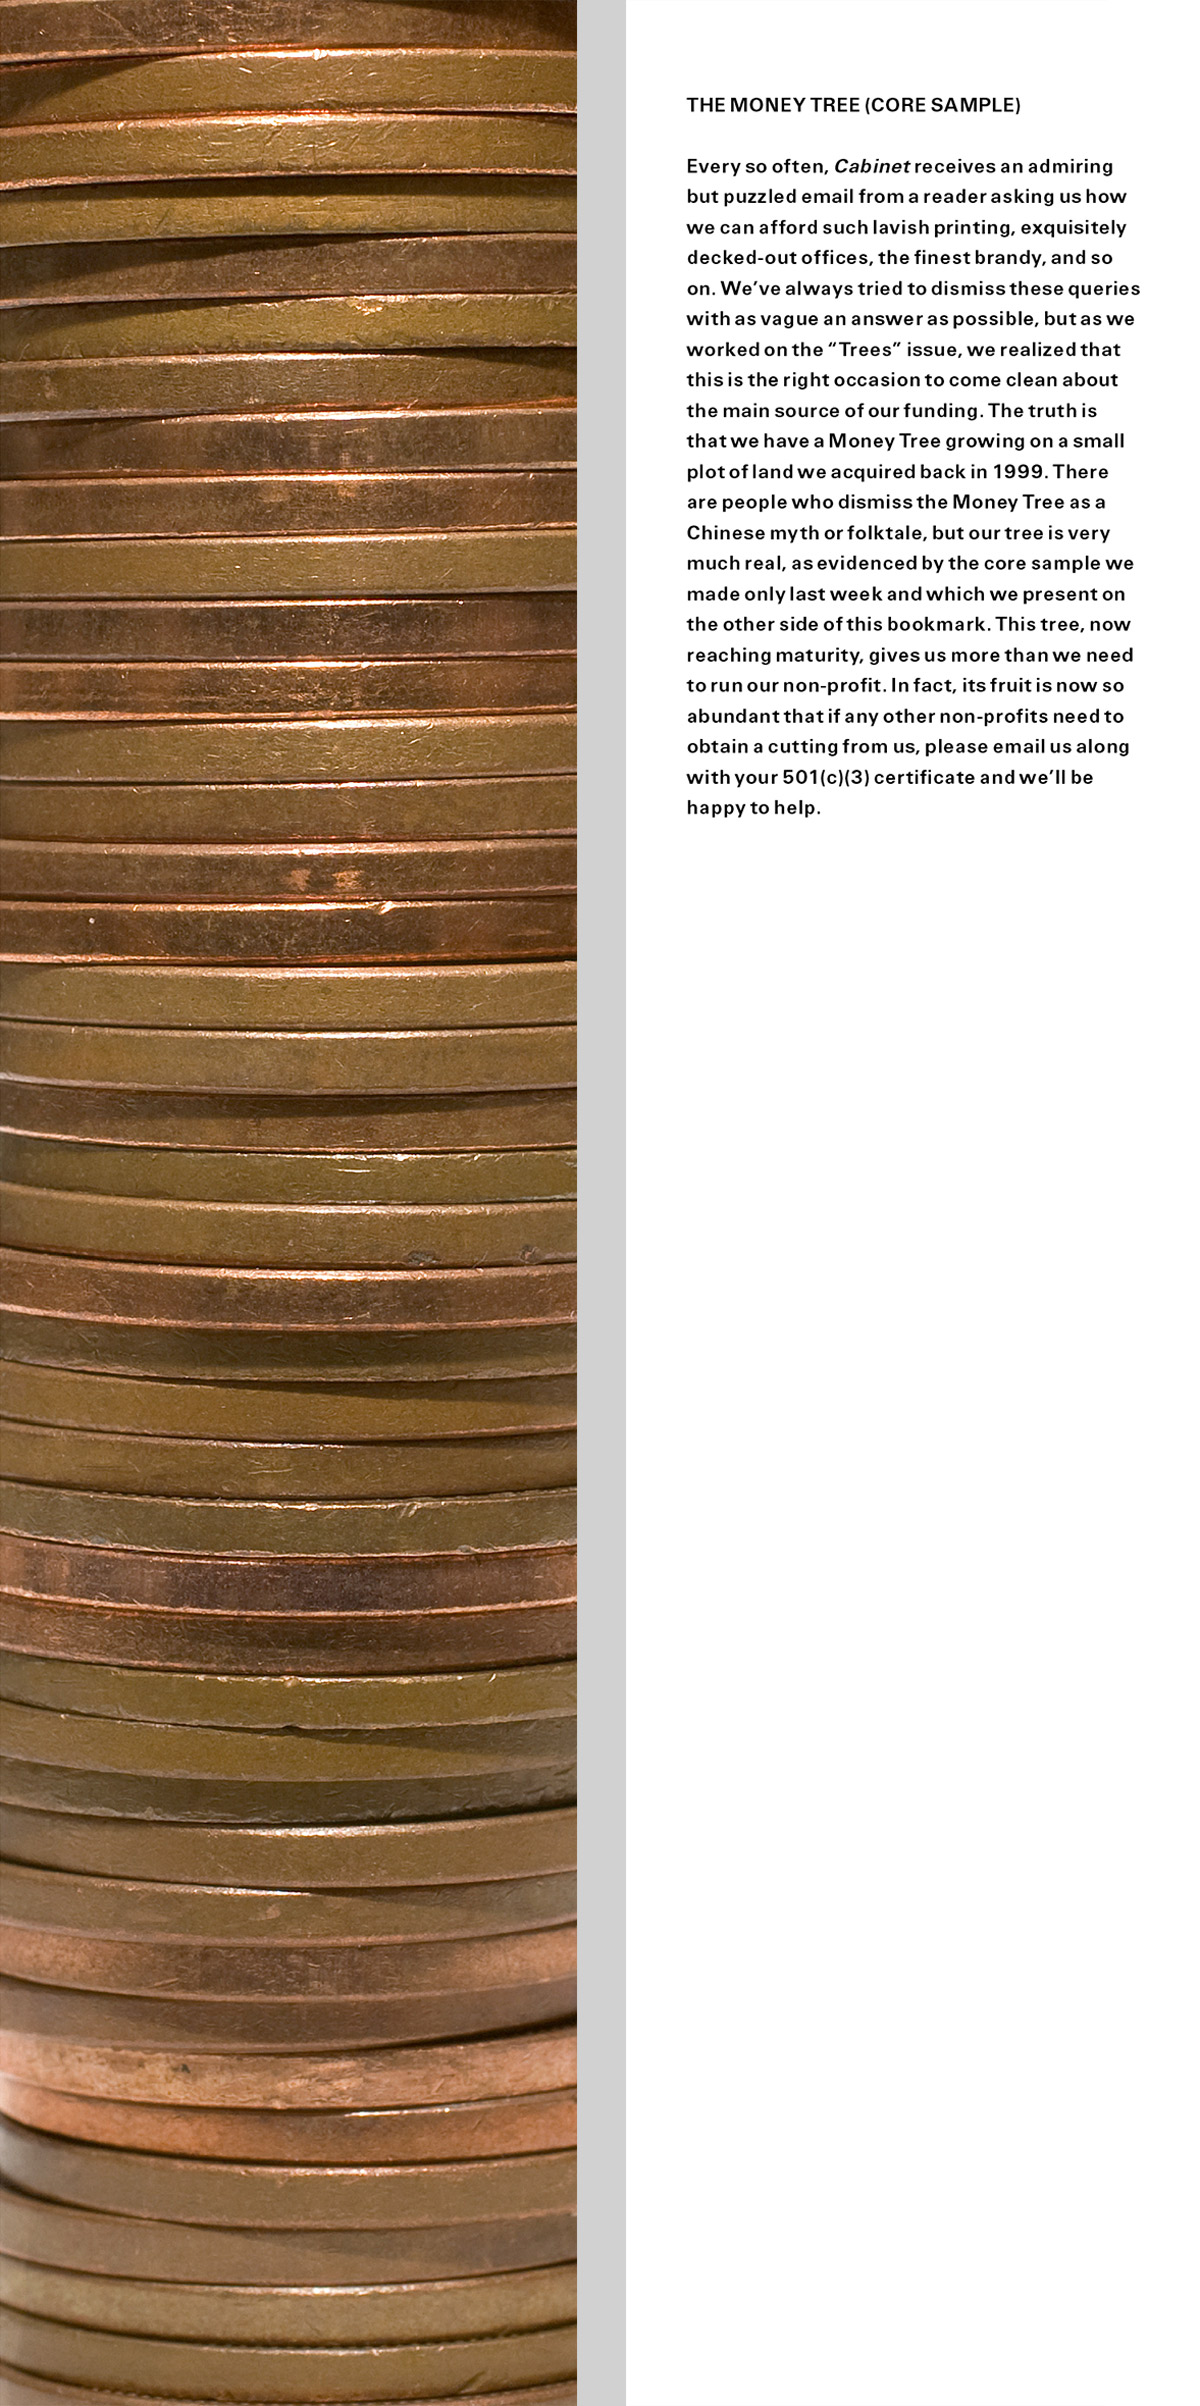 The bookmark from this issue. The front is a photograph of coins stacked so as to resemble tree rings. The back contains text that reads: “THE MONEY TREE (CORE SAMPLE). Every so often, Cabinet receives an admiring but puzzled email from a reader asking us how we can afford such lavish printing, exquisitely decked-out offices, the finest brandy, and so on. We’ve always tried to dismiss these queries with as vague an answer as possible, but as we worked on the “Trees” issue, we realized that this is the right occasion to come clean about the main source of our funding. The truth is that we have a Money Tree growing on a small plot of land we acquired back in 1999. There are people who dismiss the Money Tree as a Chinese myth or folktale, but our tree is very much real, as evidenced by the core sample we made only last week and which we present on the other side of this bookmark. This tree, now reaching maturity, gives us more than we need to run our non-profit. In fact, its fruit is now so abundant that if any other non-profits need to obtain a cutting from us, please email us along with your 501(c)(3) certificate and we’ll be happy to help.”